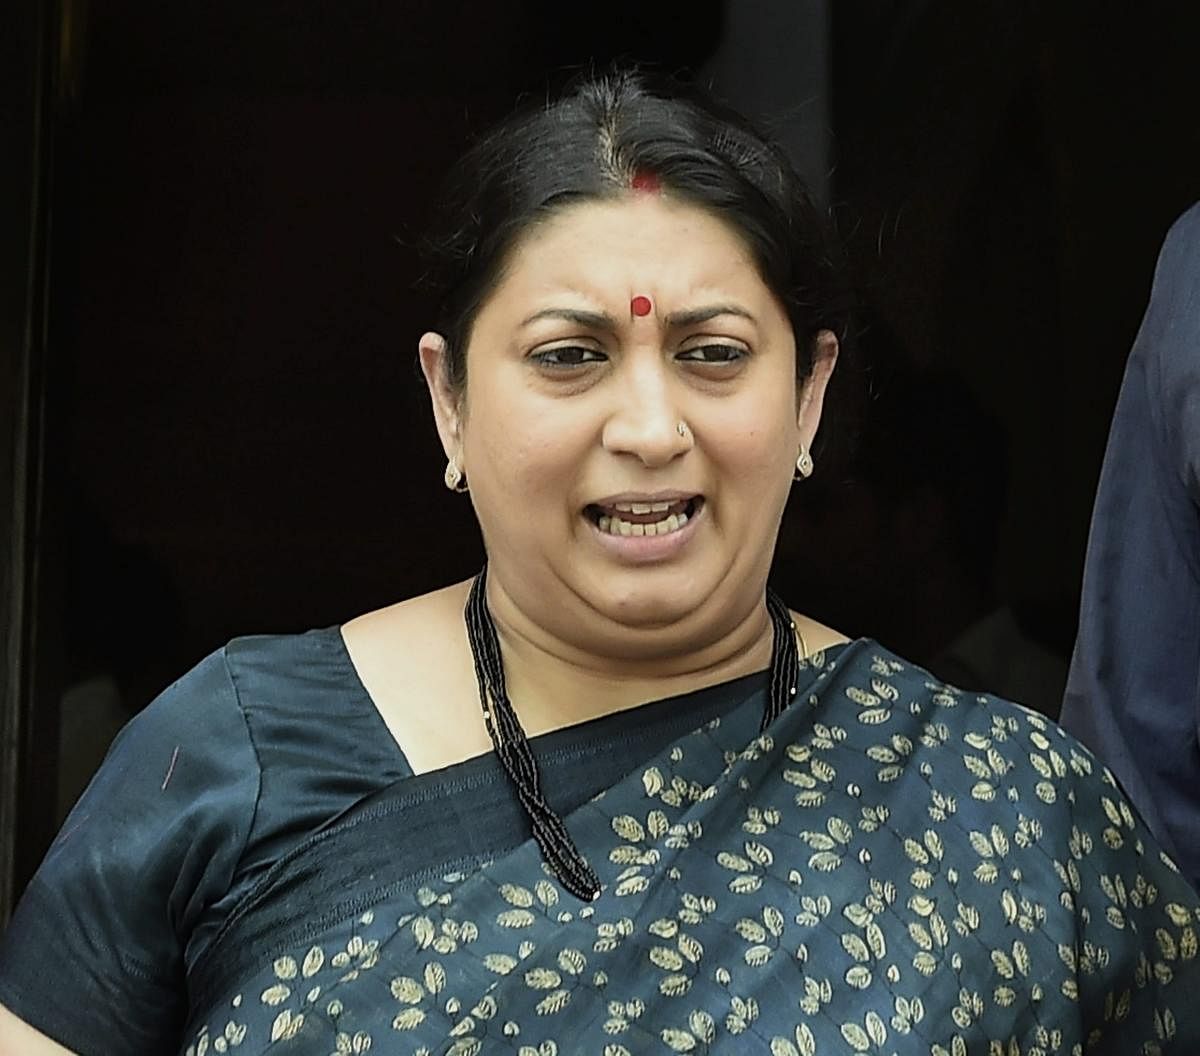 Union Information and Broadcasting Minister Smriti Irani at Parliament House during budget session in New Delhi on Thursday. PTI Photo